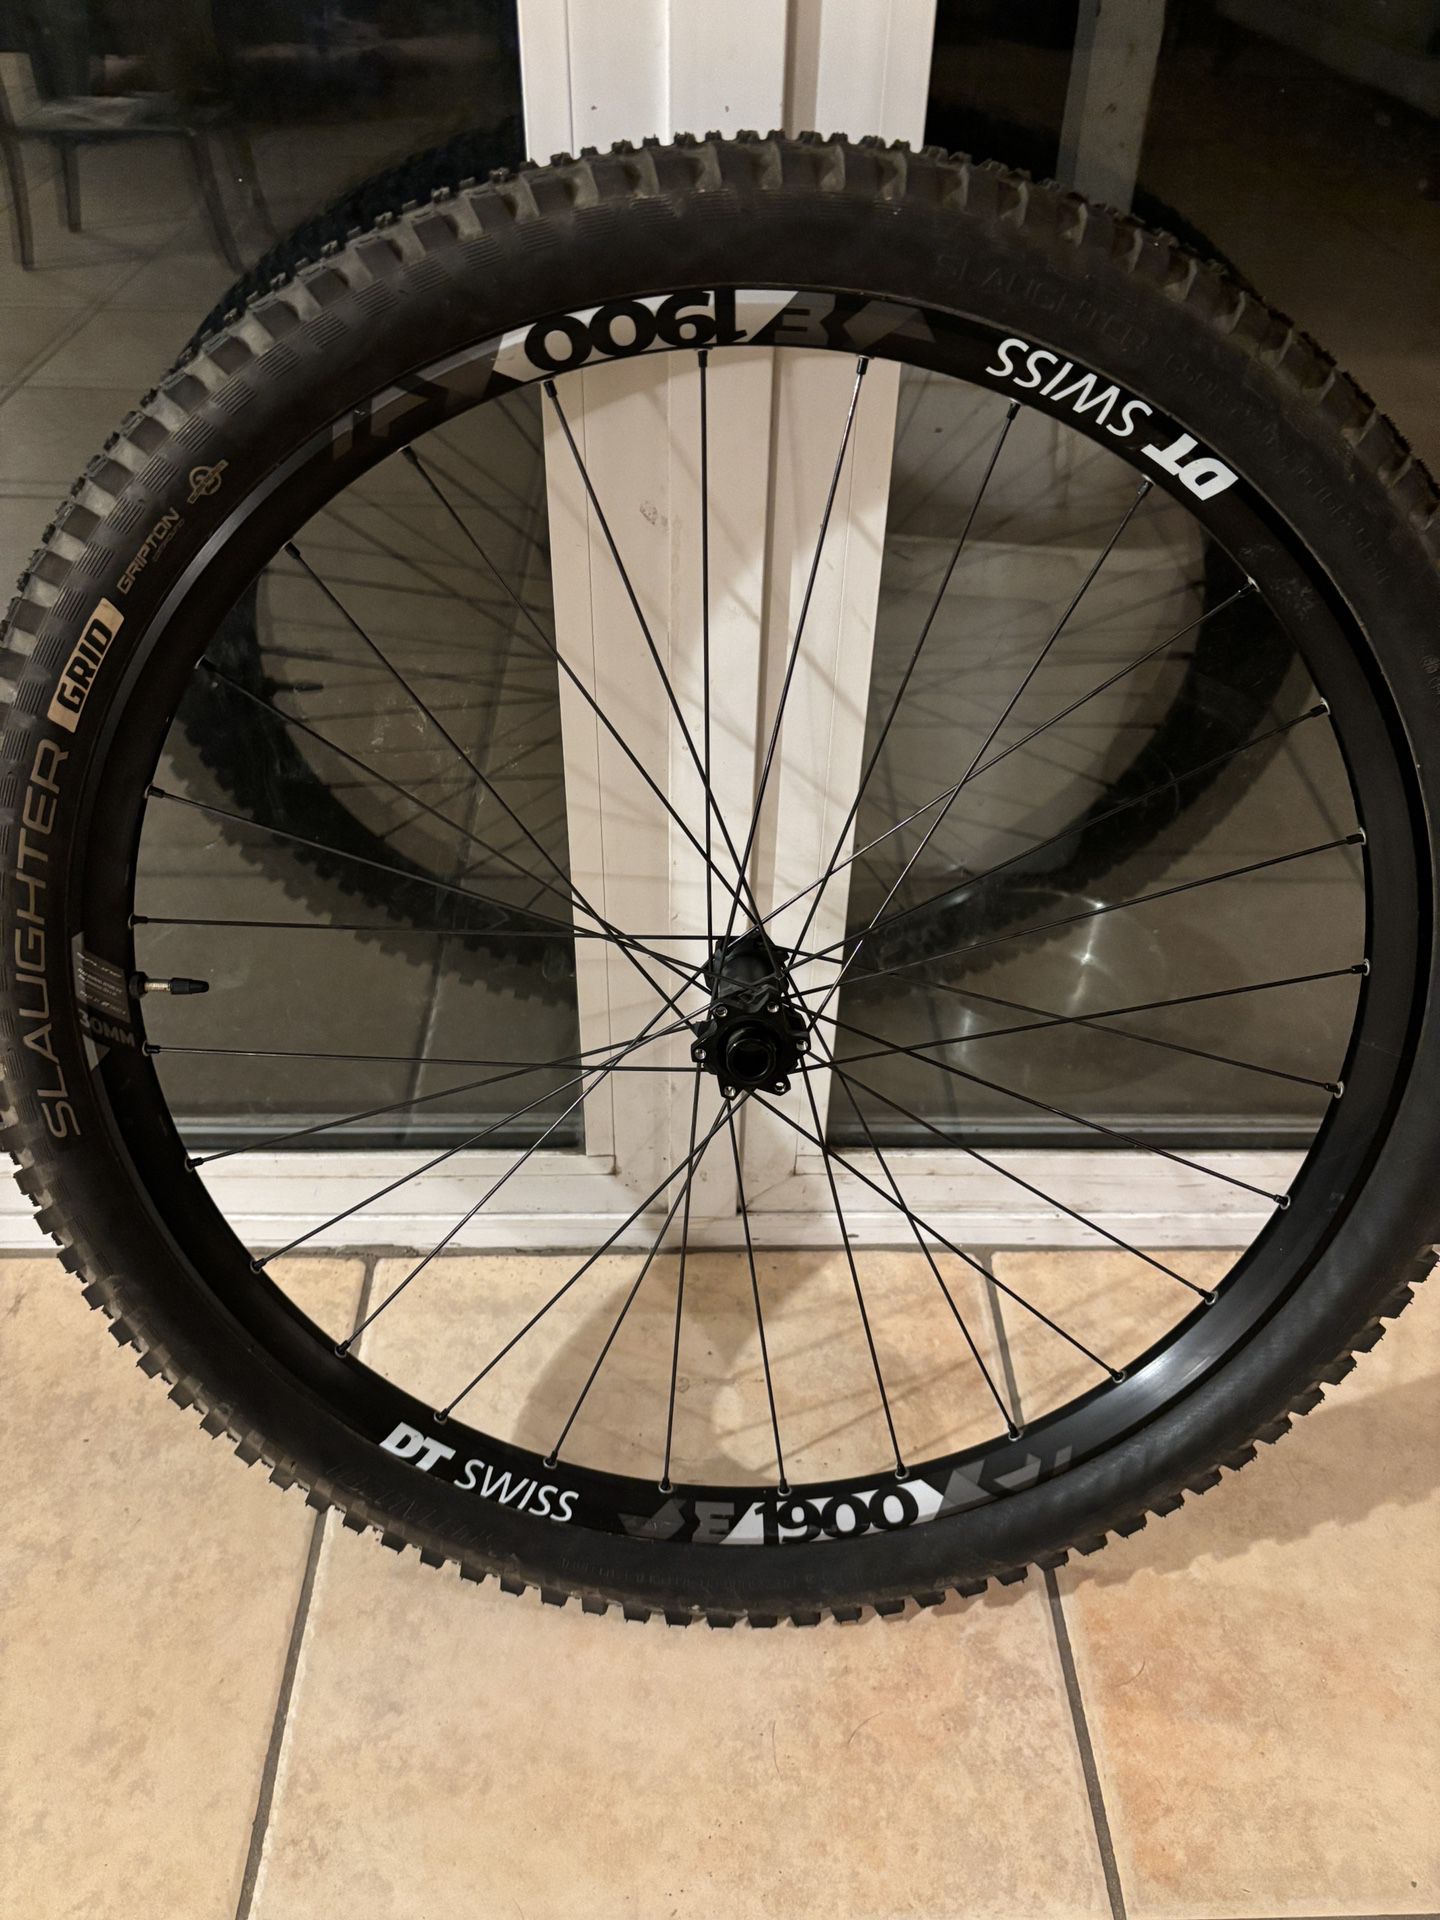 Dt Swiss E1900 Wheelset With Tires And Tubless Valves